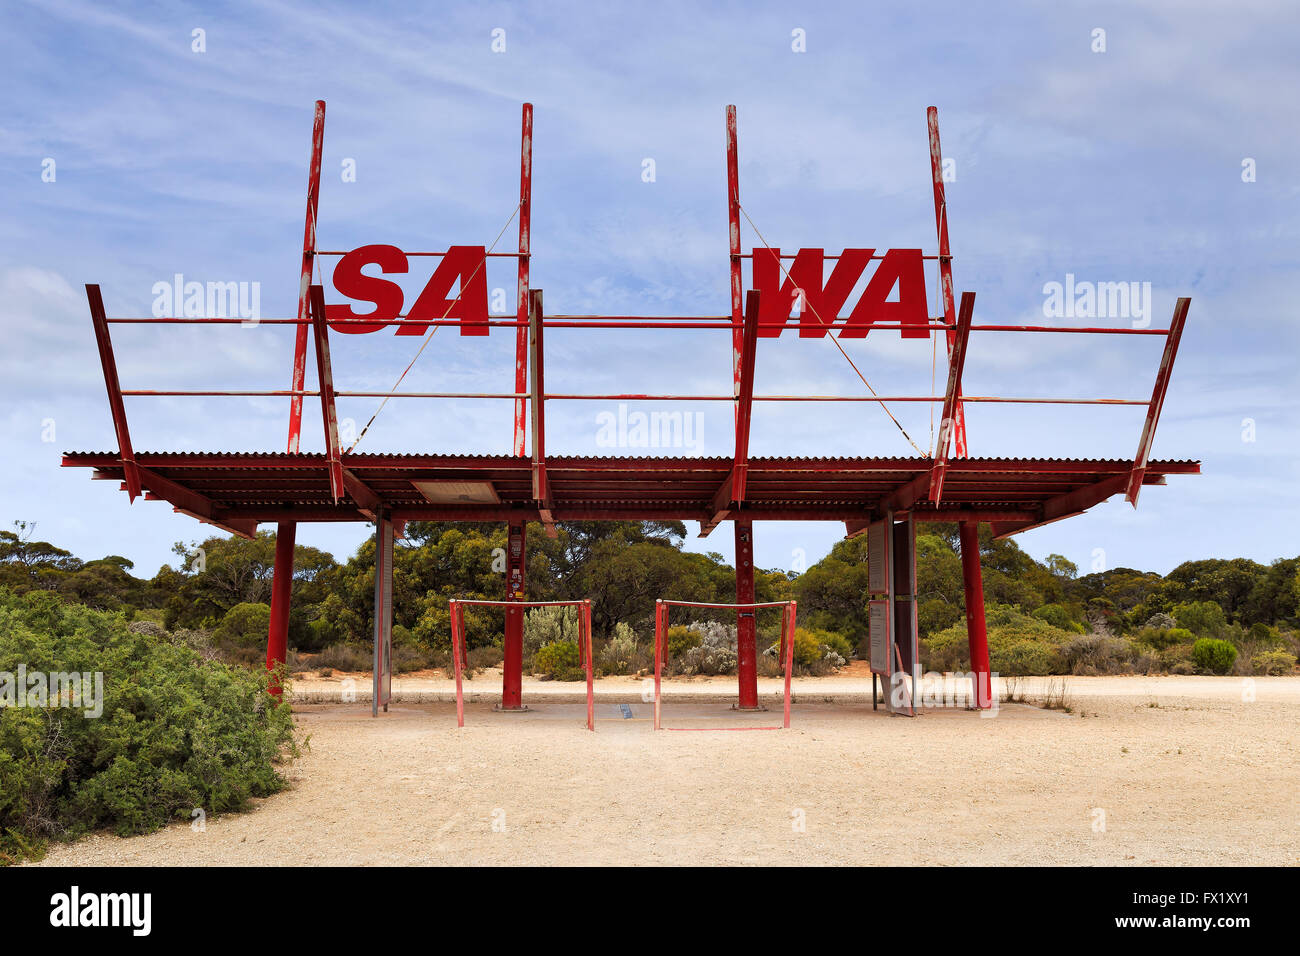 SA WA border village and border sign in a shape of old metal gate pavilion against blue sky in remote outback. Stock Photo